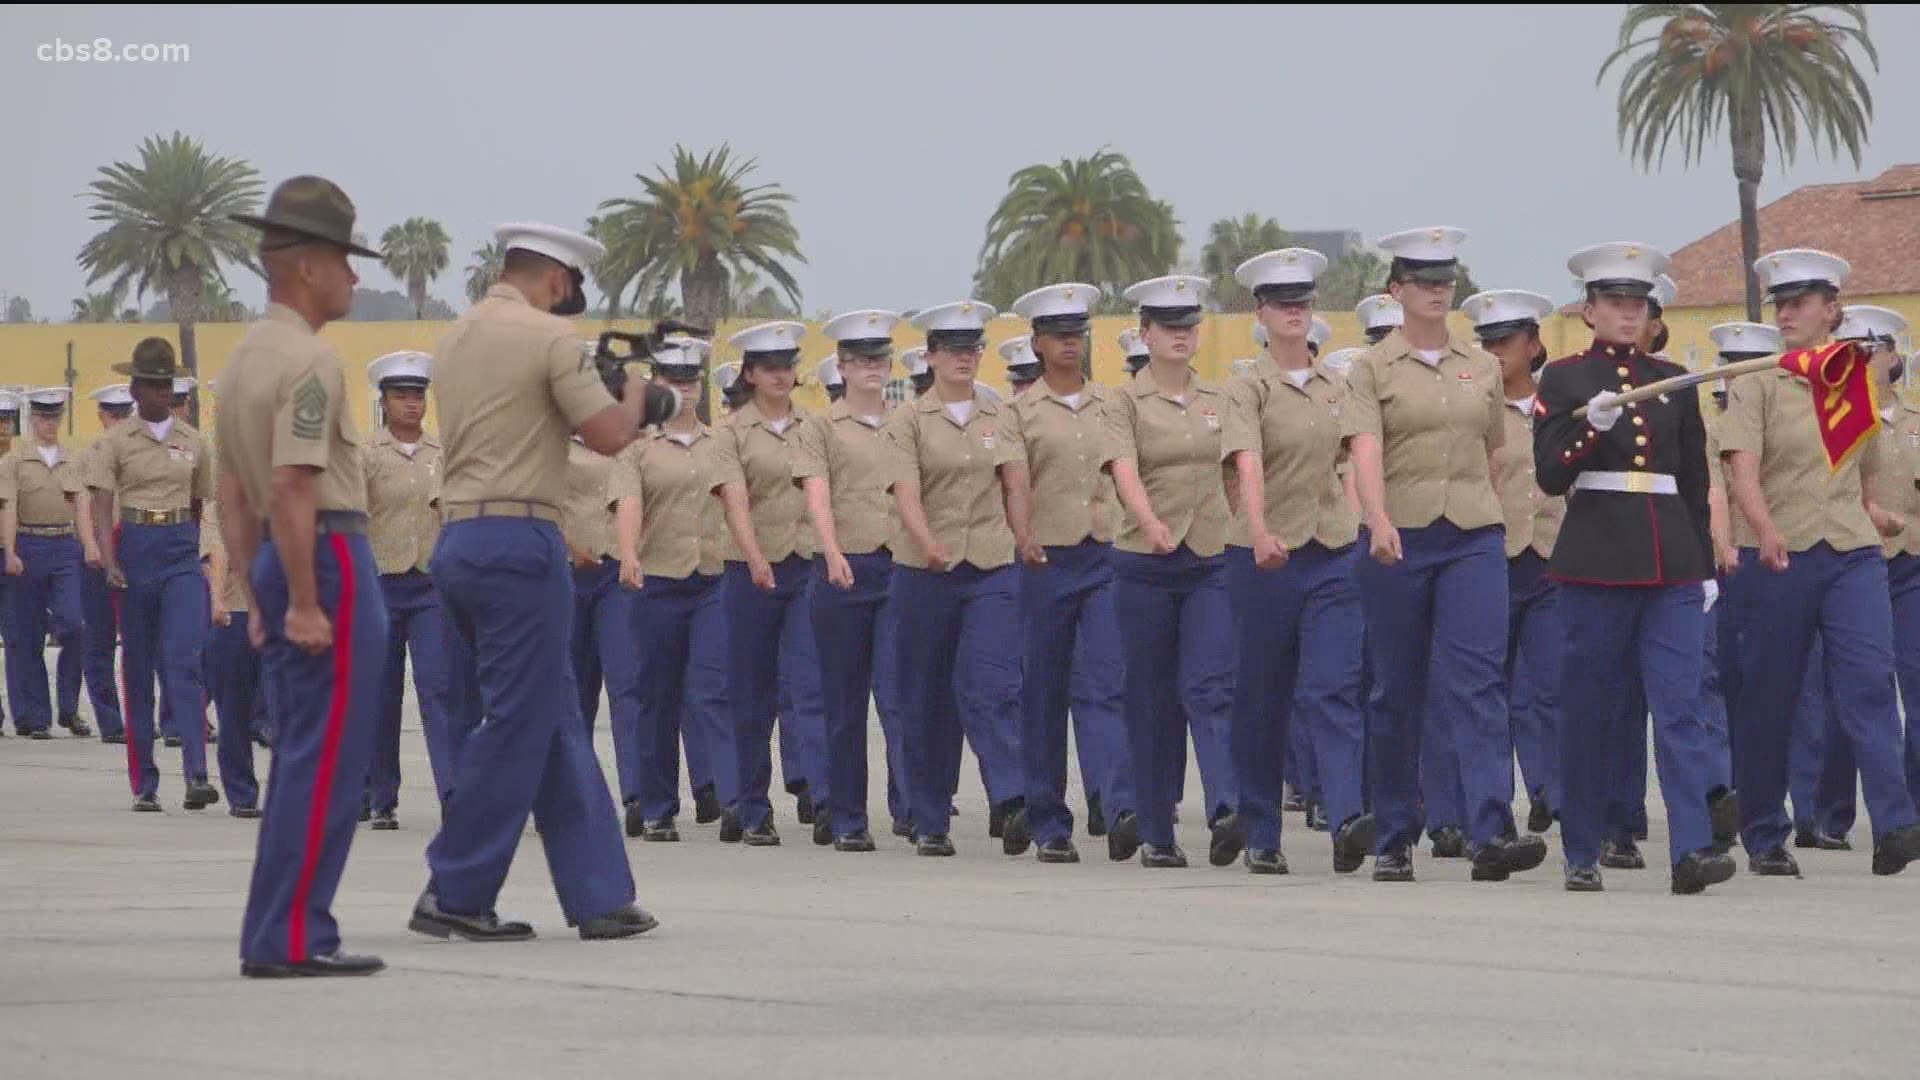 Marking a major Marine milestone, a platoon of women become first to graduate from MCRD San Diego. The 53 female Marines completed the region's first co-ed boot camp